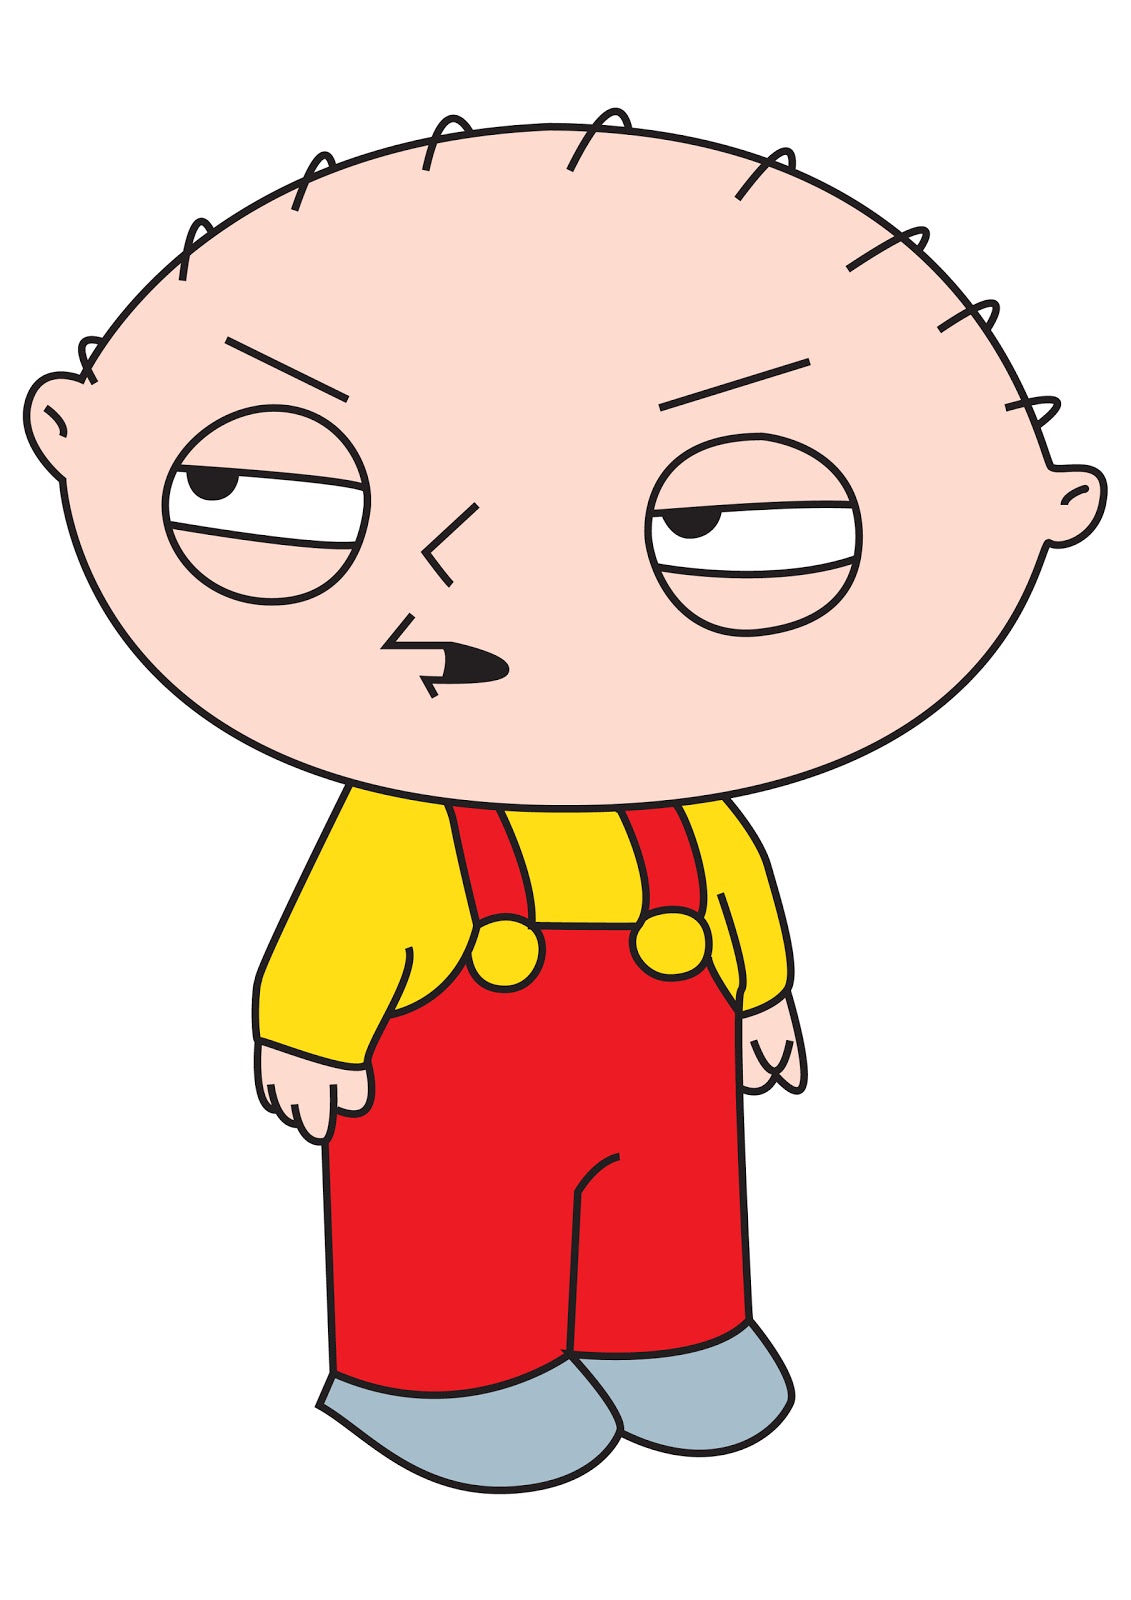 how old is stewie griffin